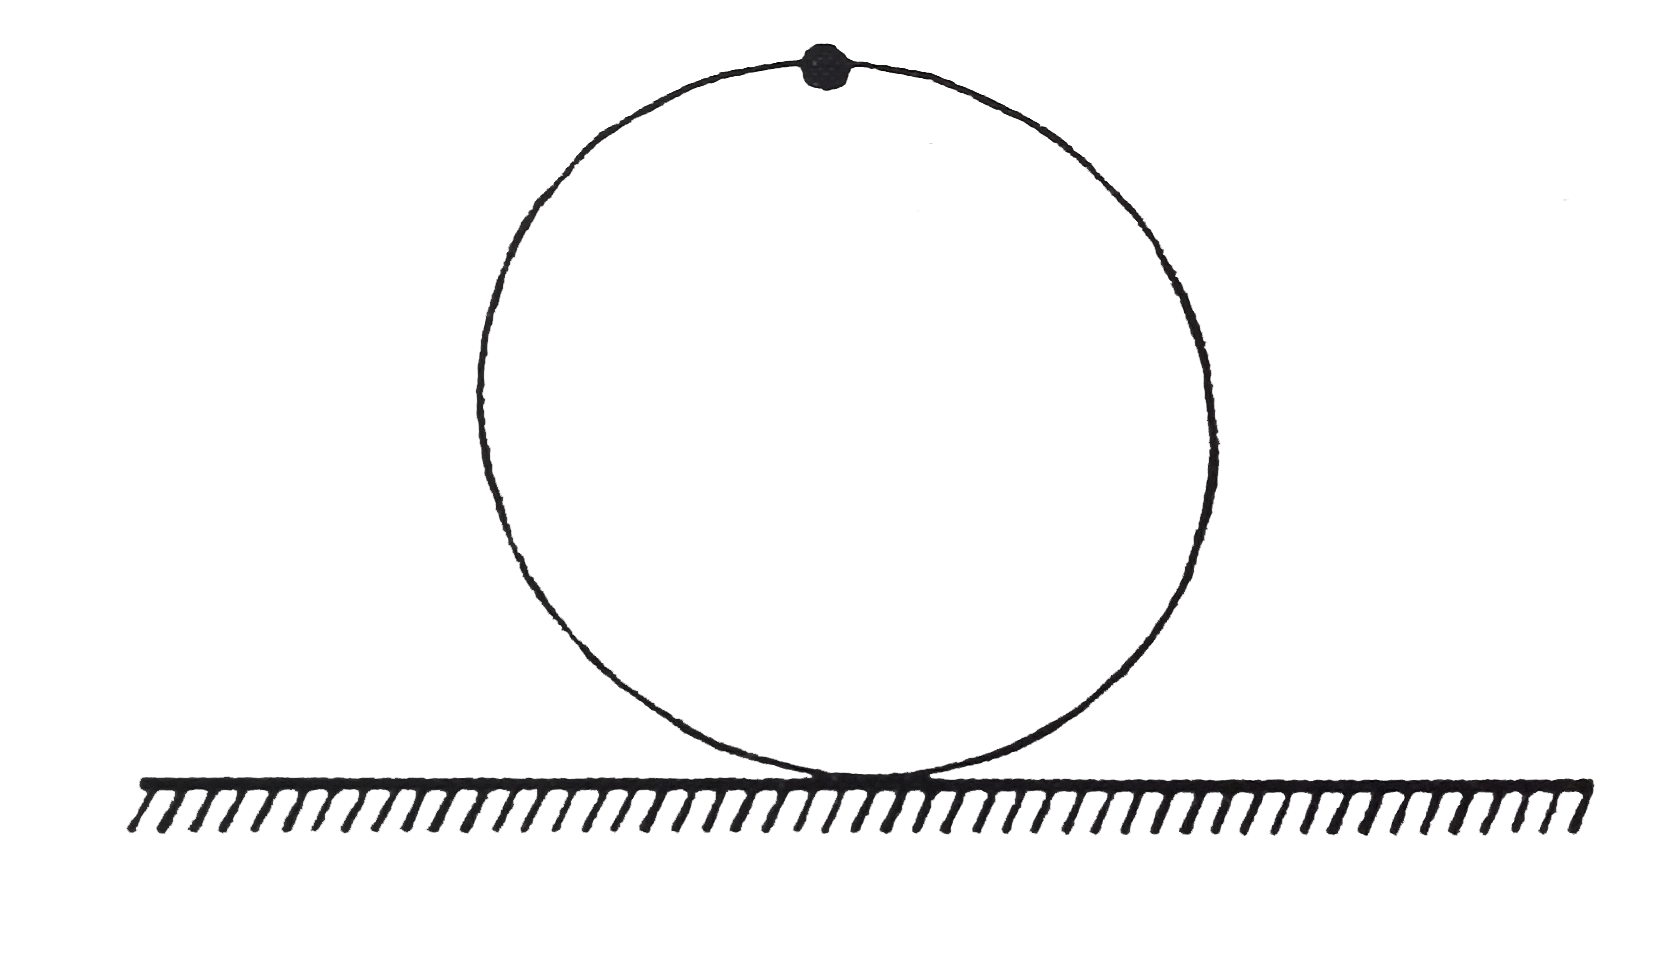 A small particle of mass m is fixed to the perimeter of a ring of same mass and radius r. The system comprising of particle and ring is placed on a horizontal plane. Friction is negligible on horizontal plane. Initially particle is at top most point, then the system is released from rest. Answer next two question when the particle is at the same height as the centre of ring aftr being released from top most point. Assume that the ring stays in vertical plane during its motion under consideration      Mark the CORRECT option(s):